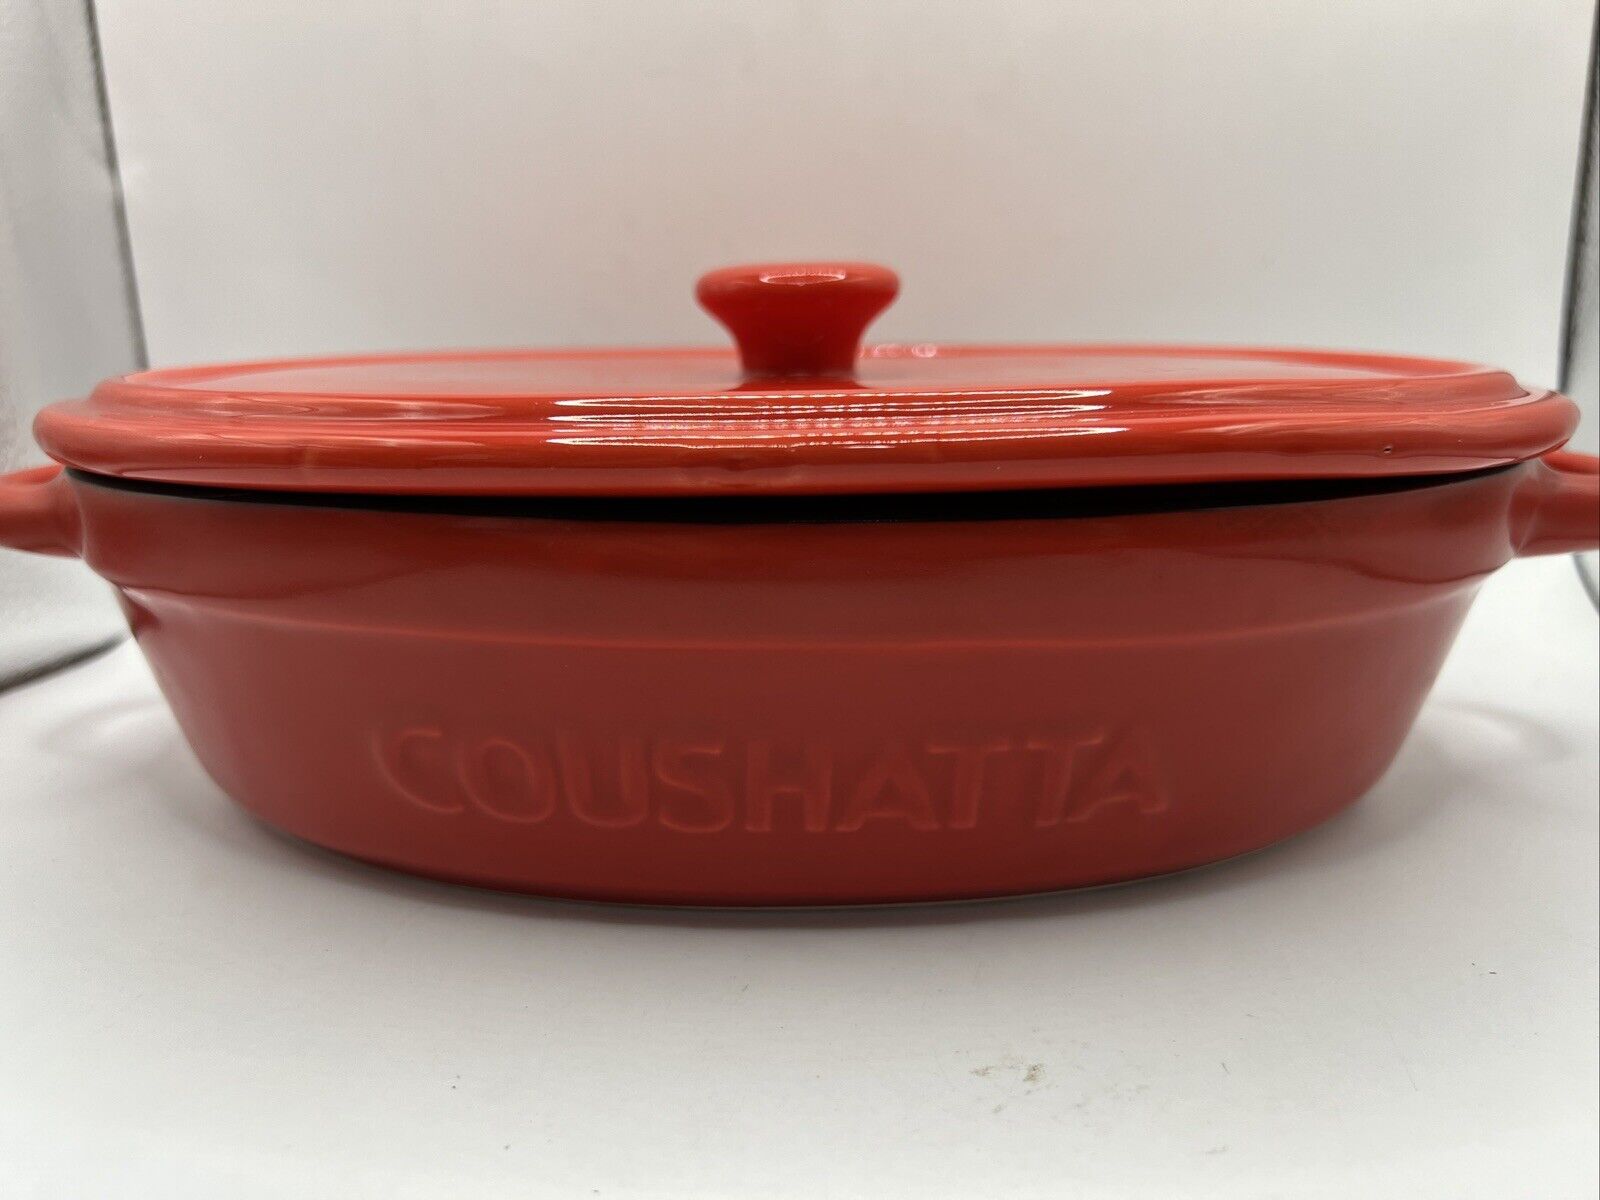 Coushatta Red and Black Ceramic Bakeware Dish With Lid - Coushatta Casino Resort